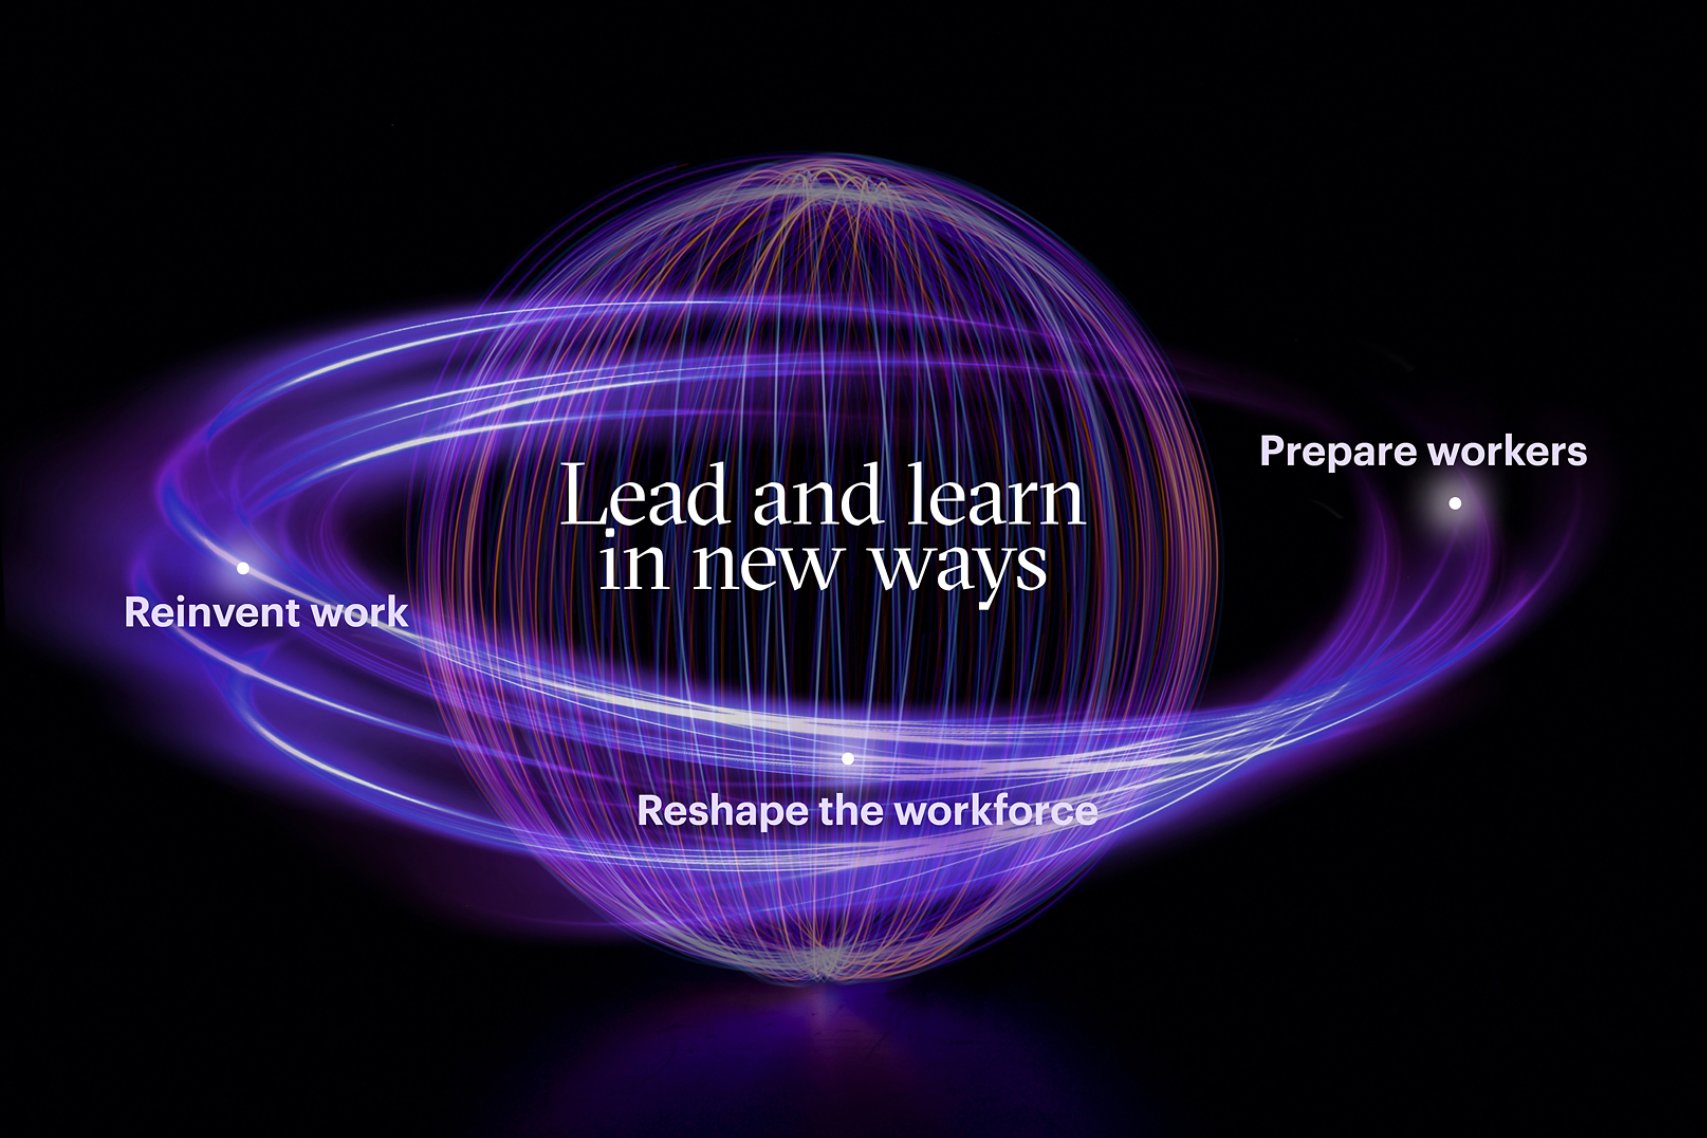 Learn and lead in new ways